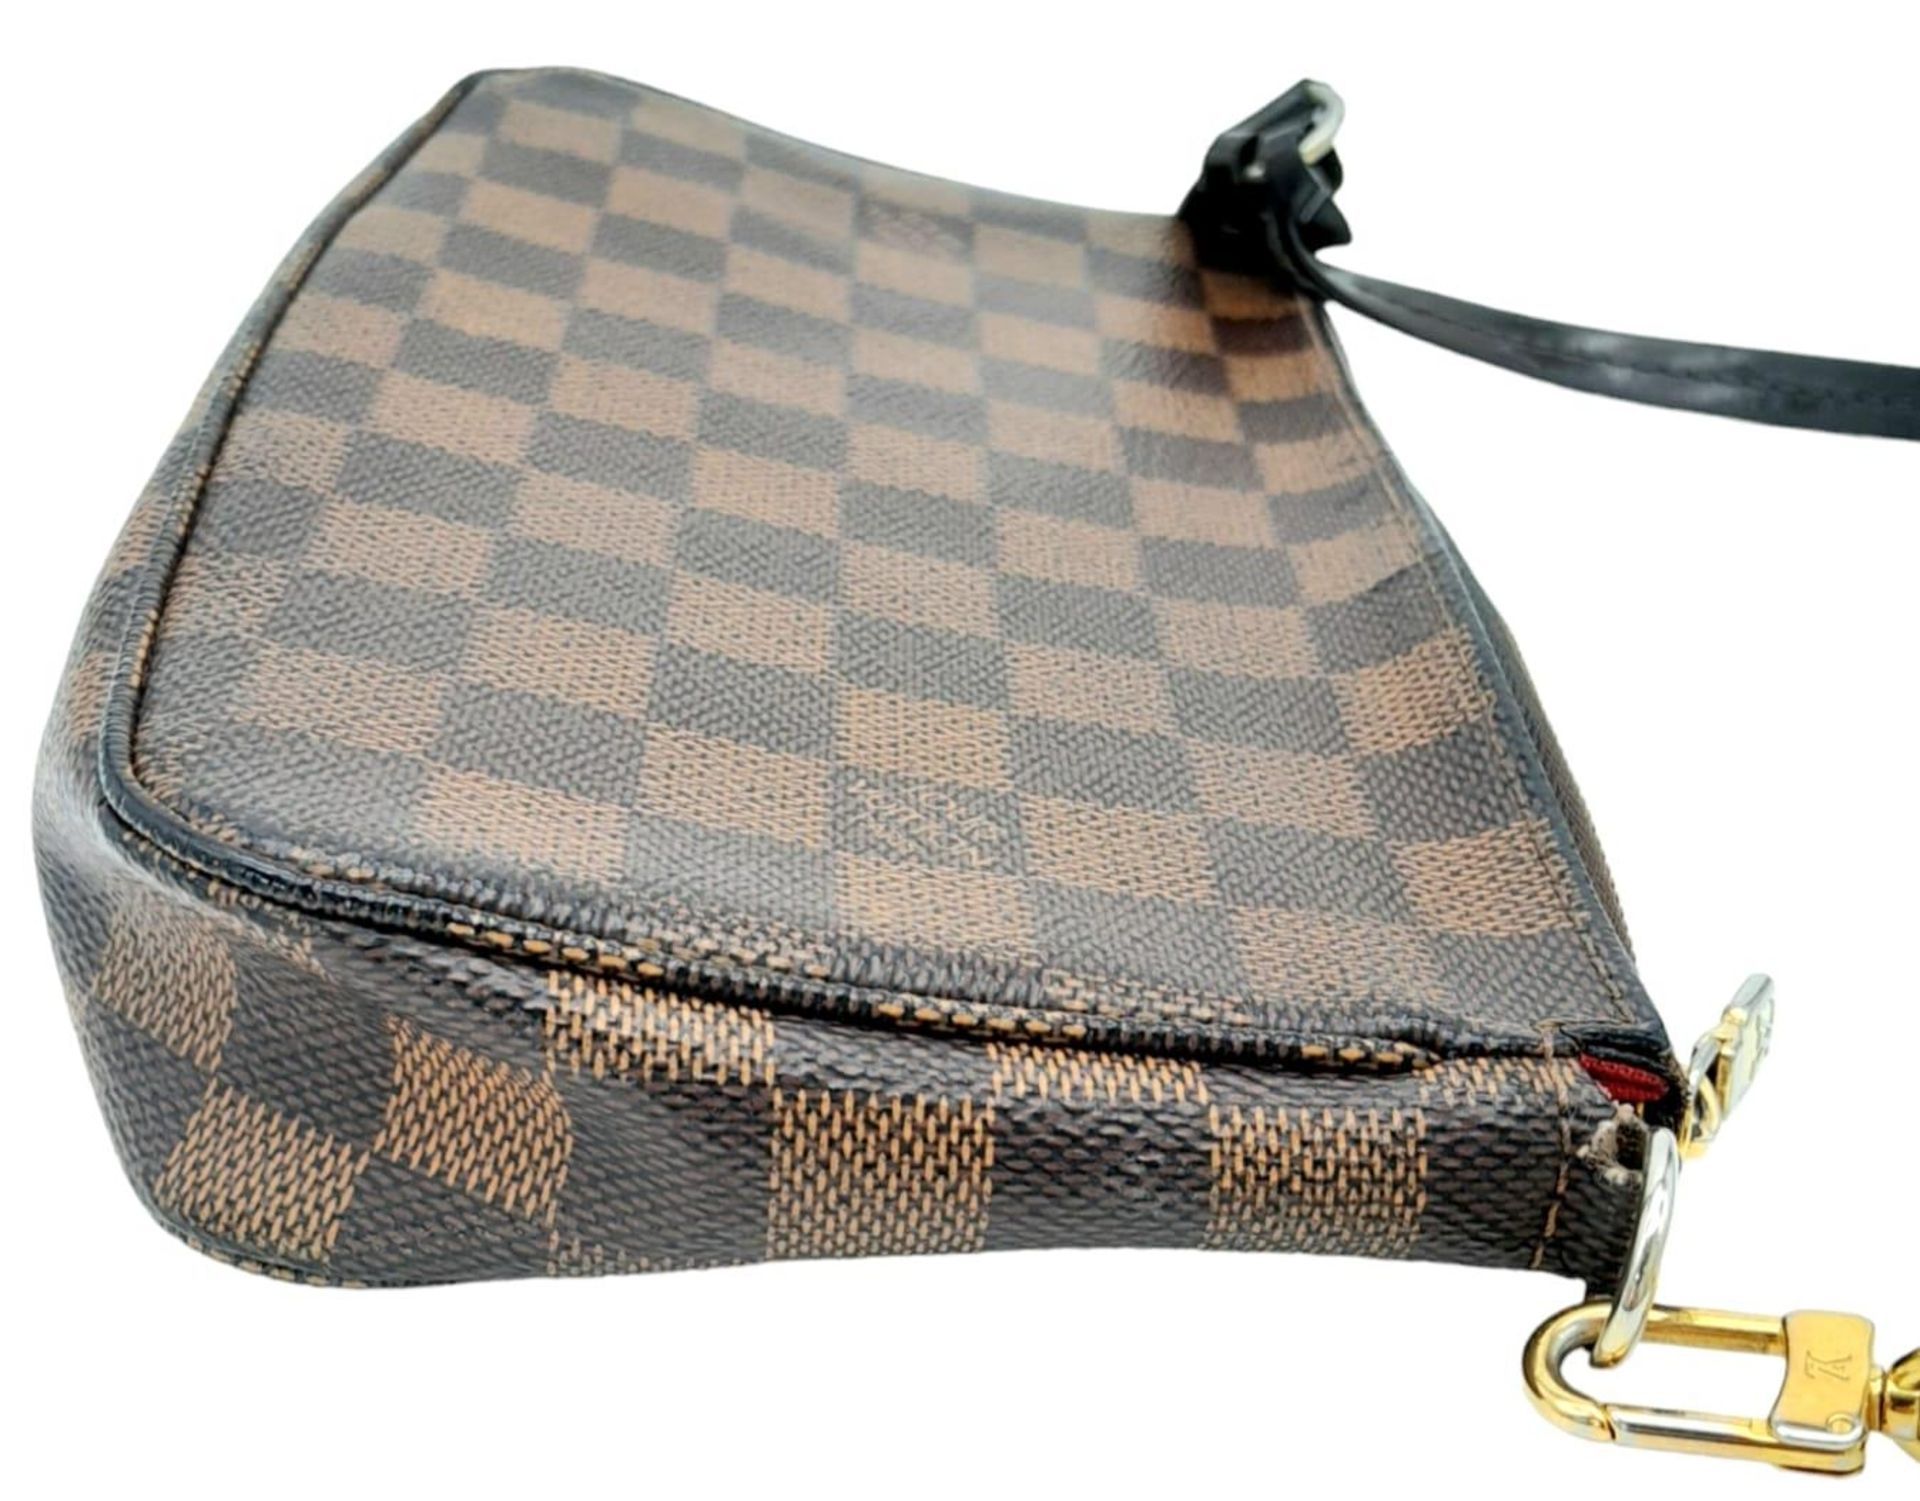 A Louis Vuitton Damier Ebene Pochette with Leather Exterior. Top Zip Closure. Red Fabric Lining with - Image 3 of 7